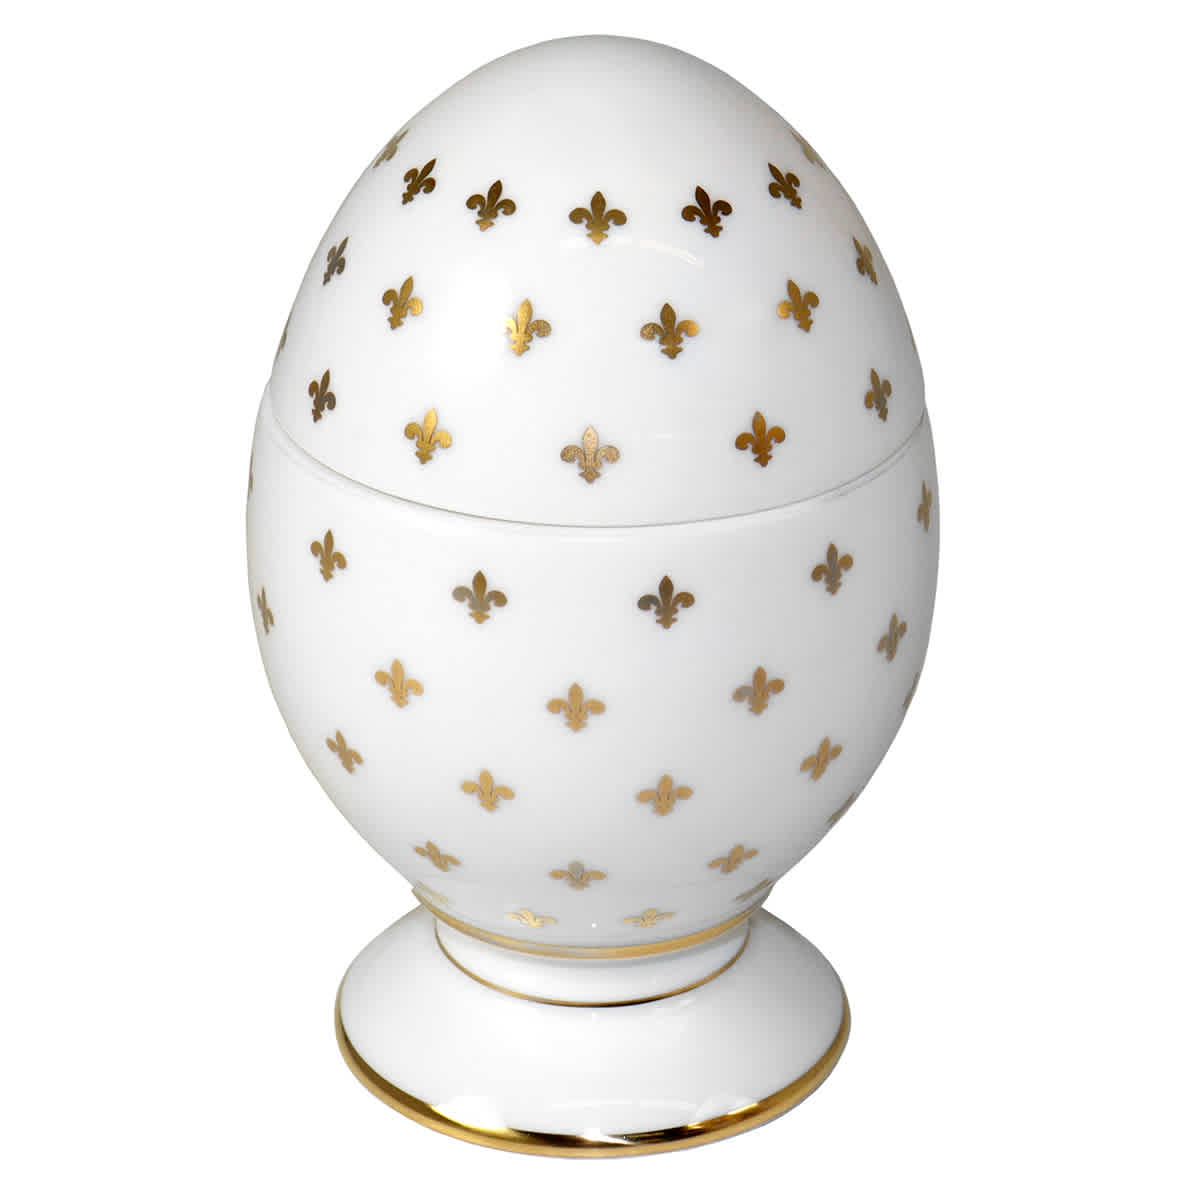 Ginori 1735 Gigli Egg With Cover In N/a